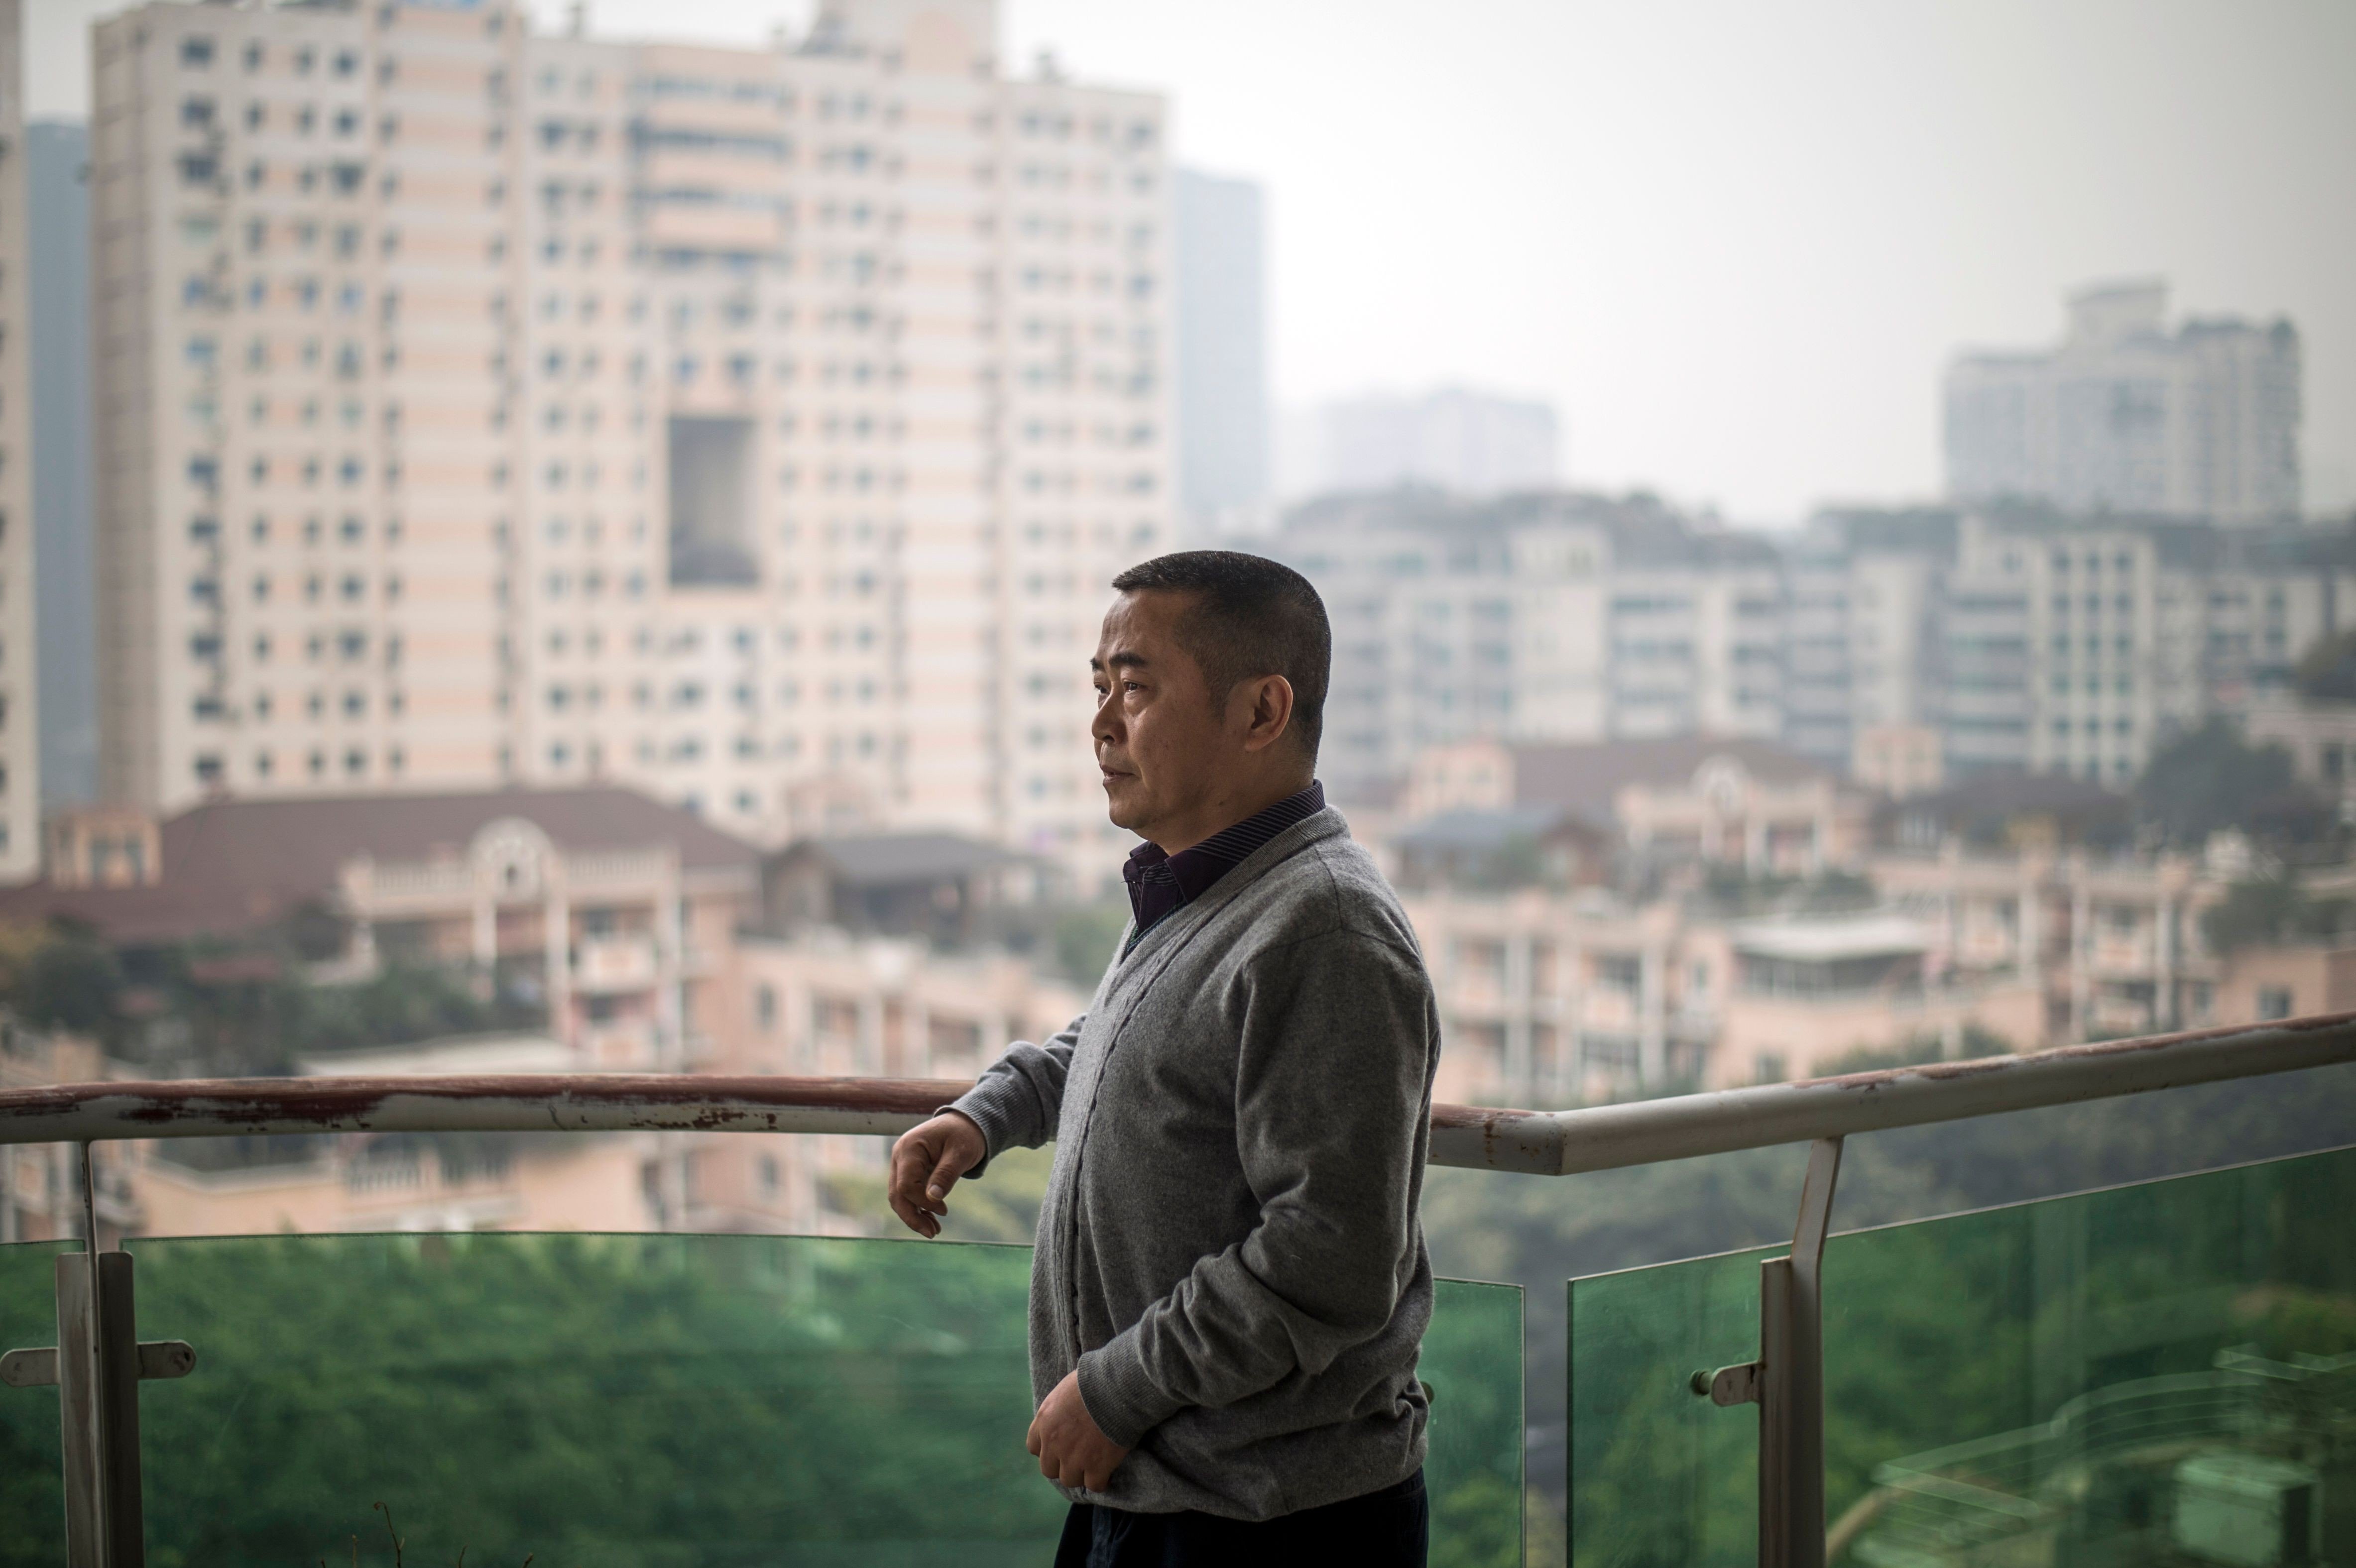 The activist Huang Qi at his home in Chengdu, Sichuan province, in 2015. This week he was sentenced to 12 years in jail, his third prison term. Photo: AFP